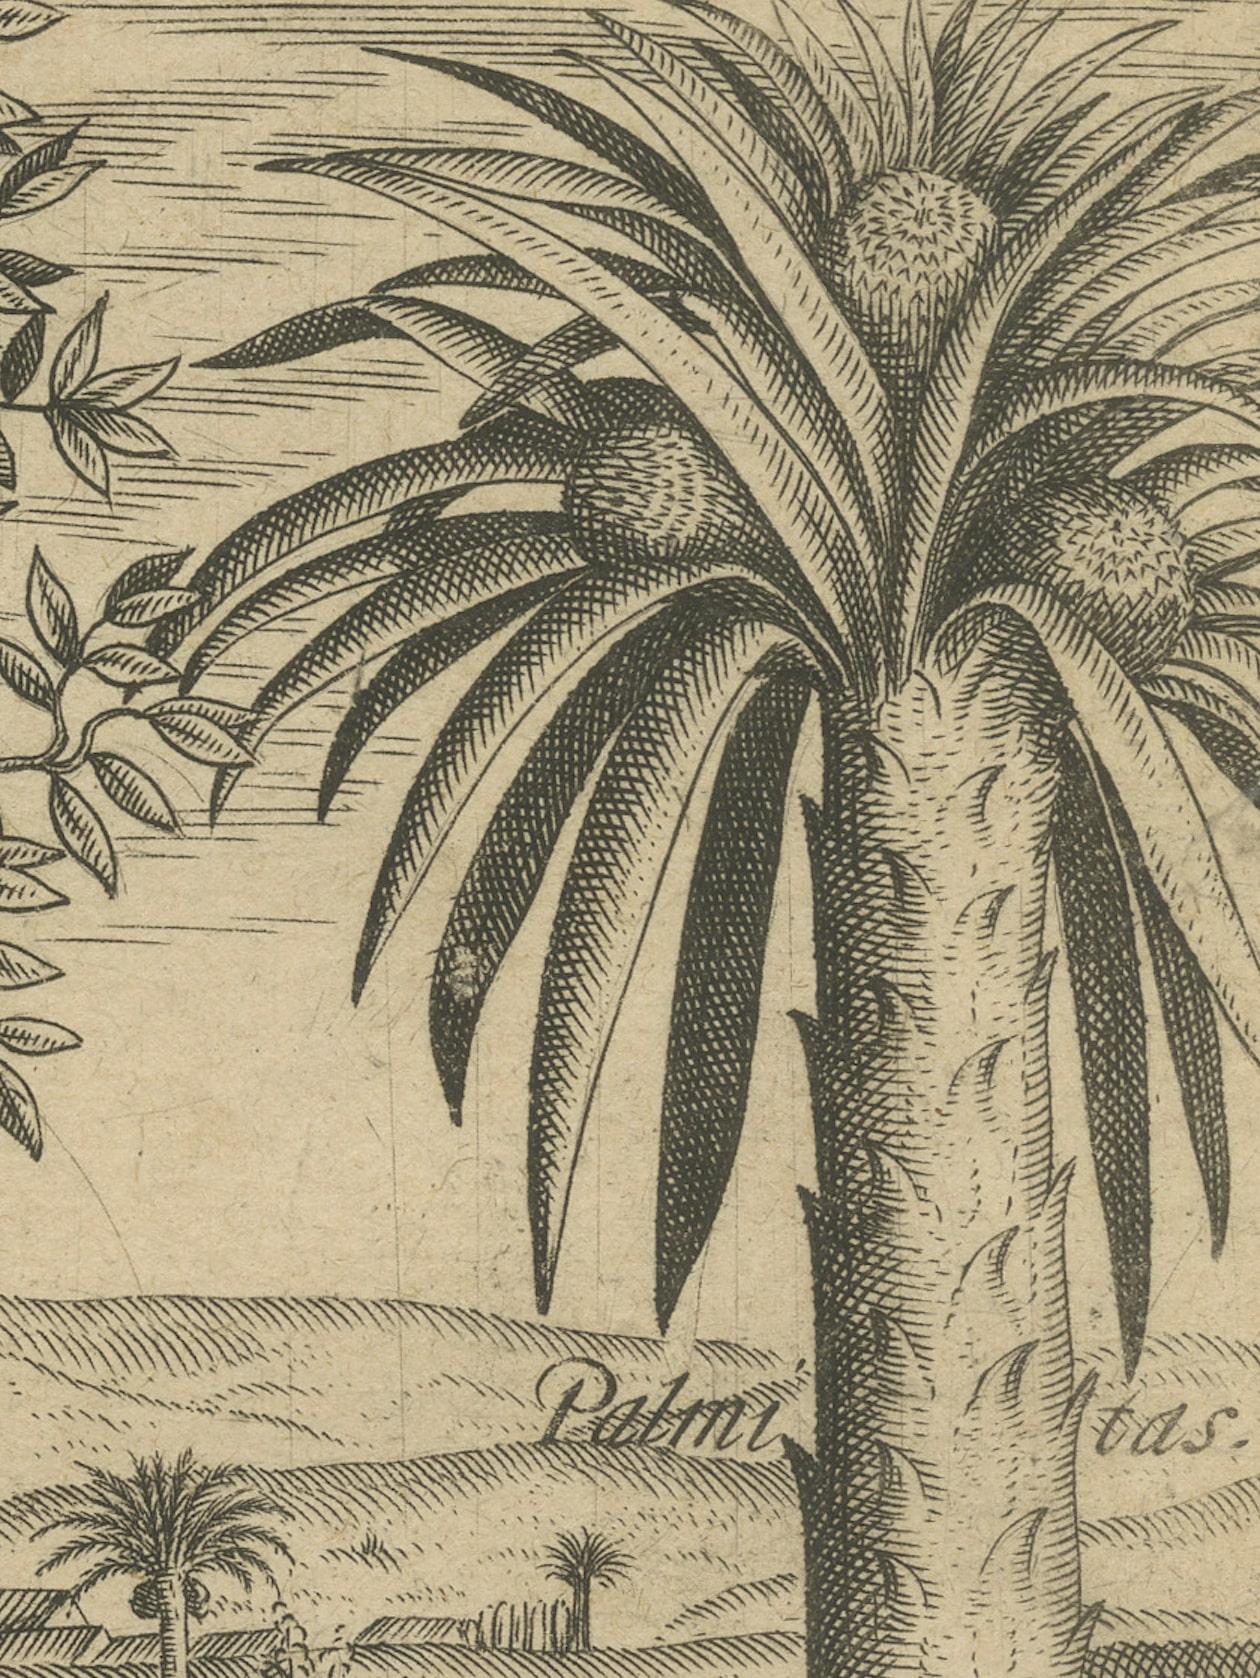 17th Century Tropical Abundance: The Jackfruit and Palm Trees in De Bry's 1601 Engraving For Sale